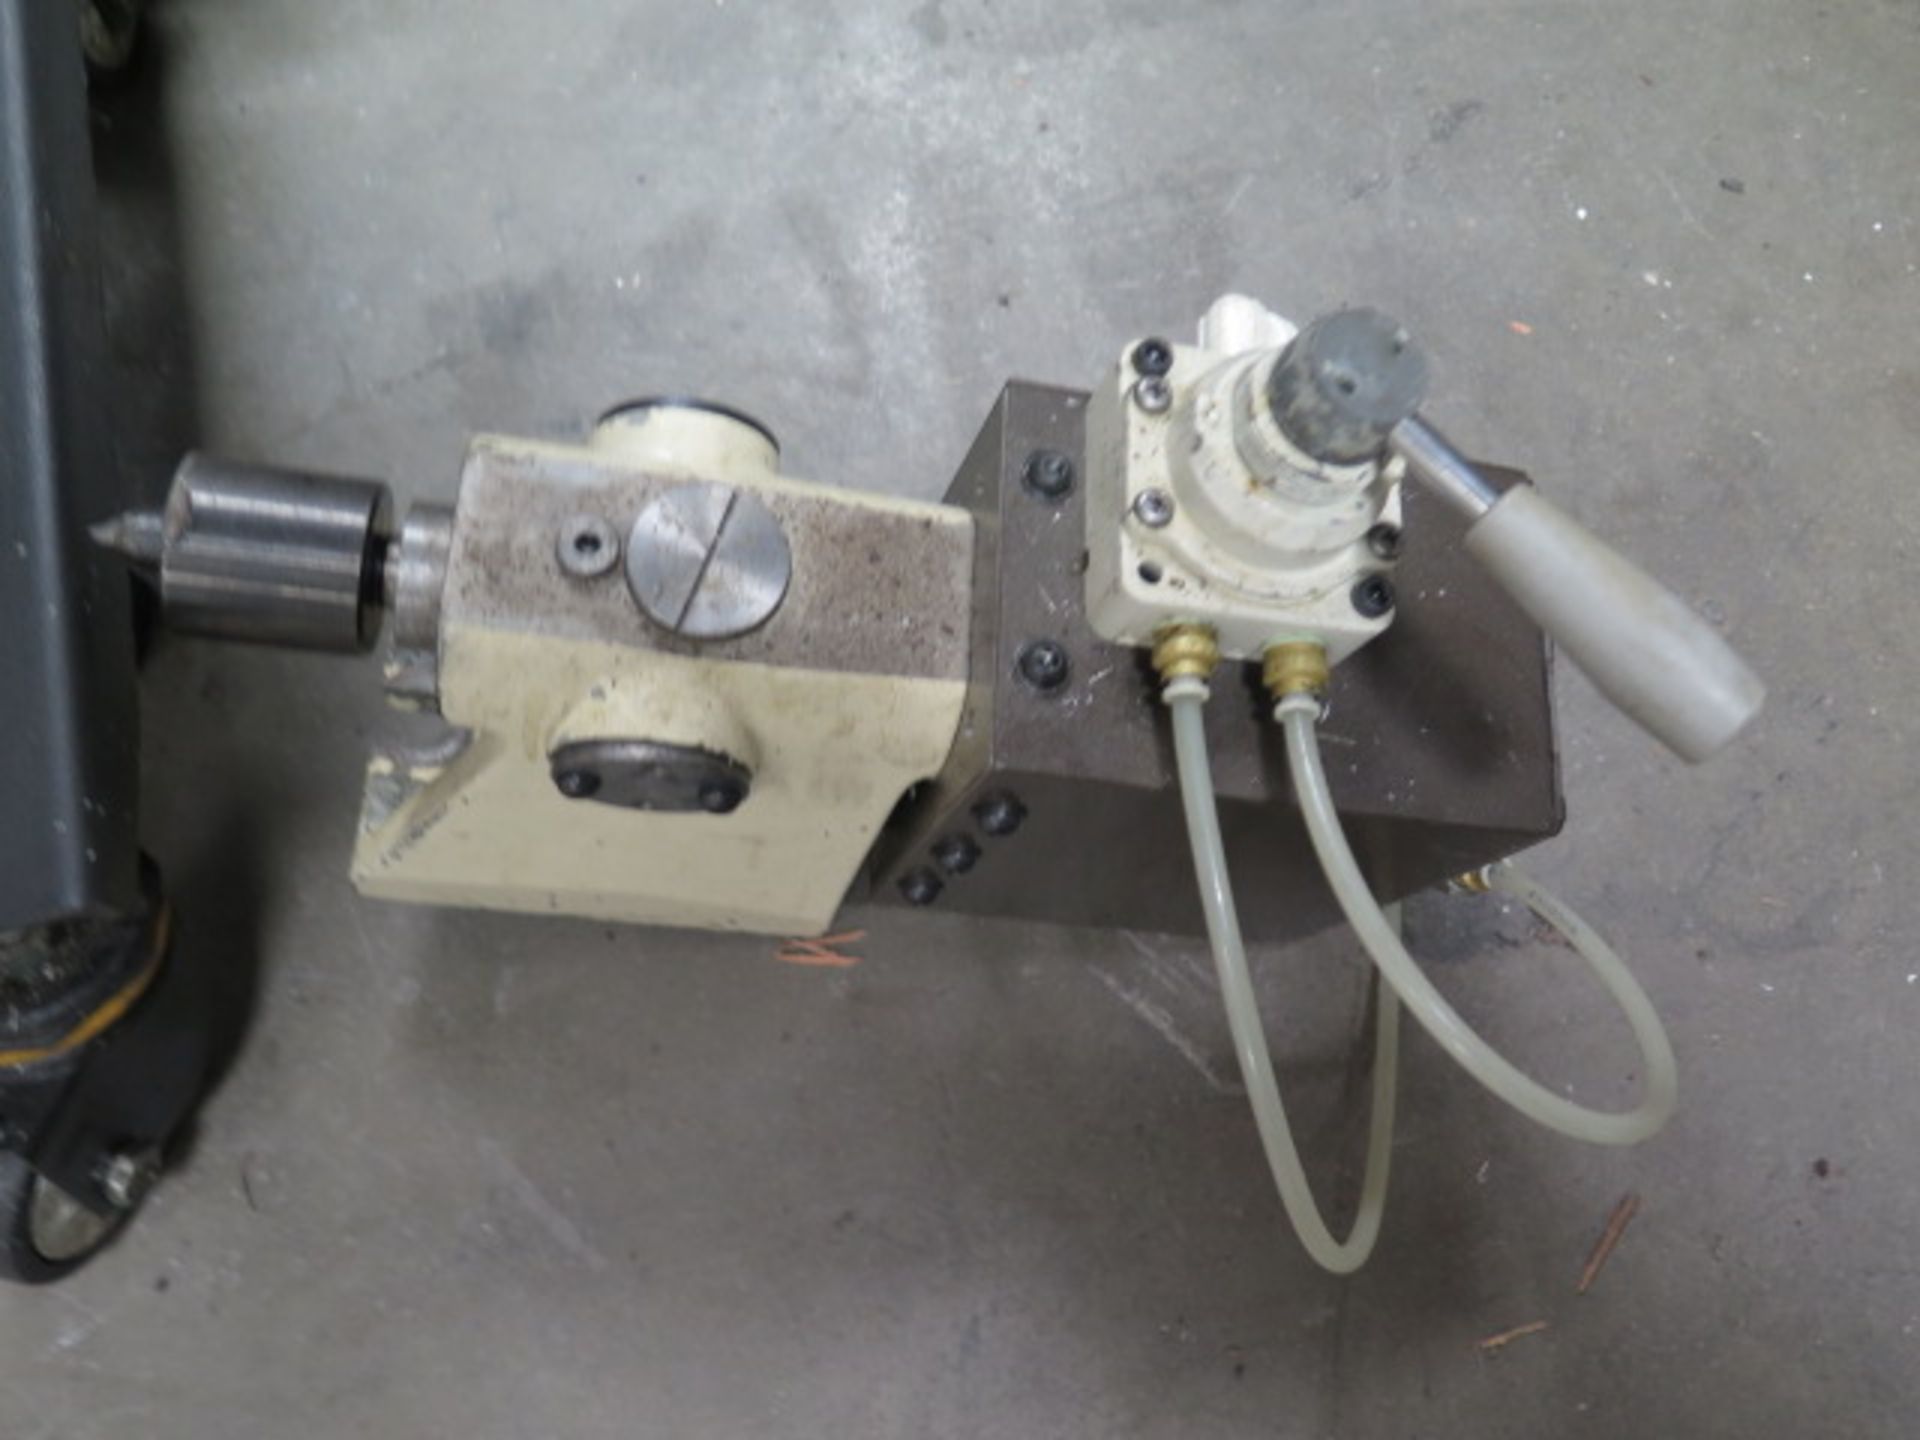 4th Axis 5C Rotary Head w/ Pneumatic Collet Closer and Pneumatic Tailstock (SOLD AS-IS - NO WARRANTY - Image 7 of 7